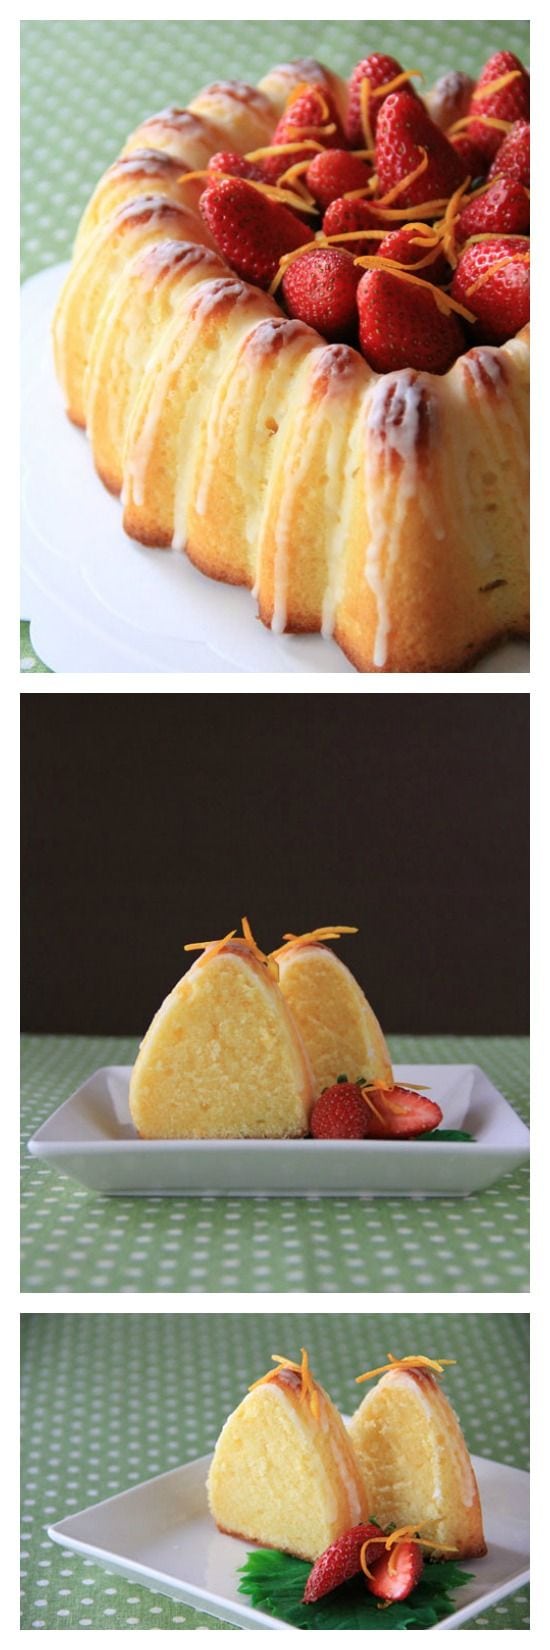 Sicilian Orange Cake is similar to butter cake, with addition of orange juice. Sicilian Orange Cake is buttery, rich, and delicious. | rasamalaysia.com